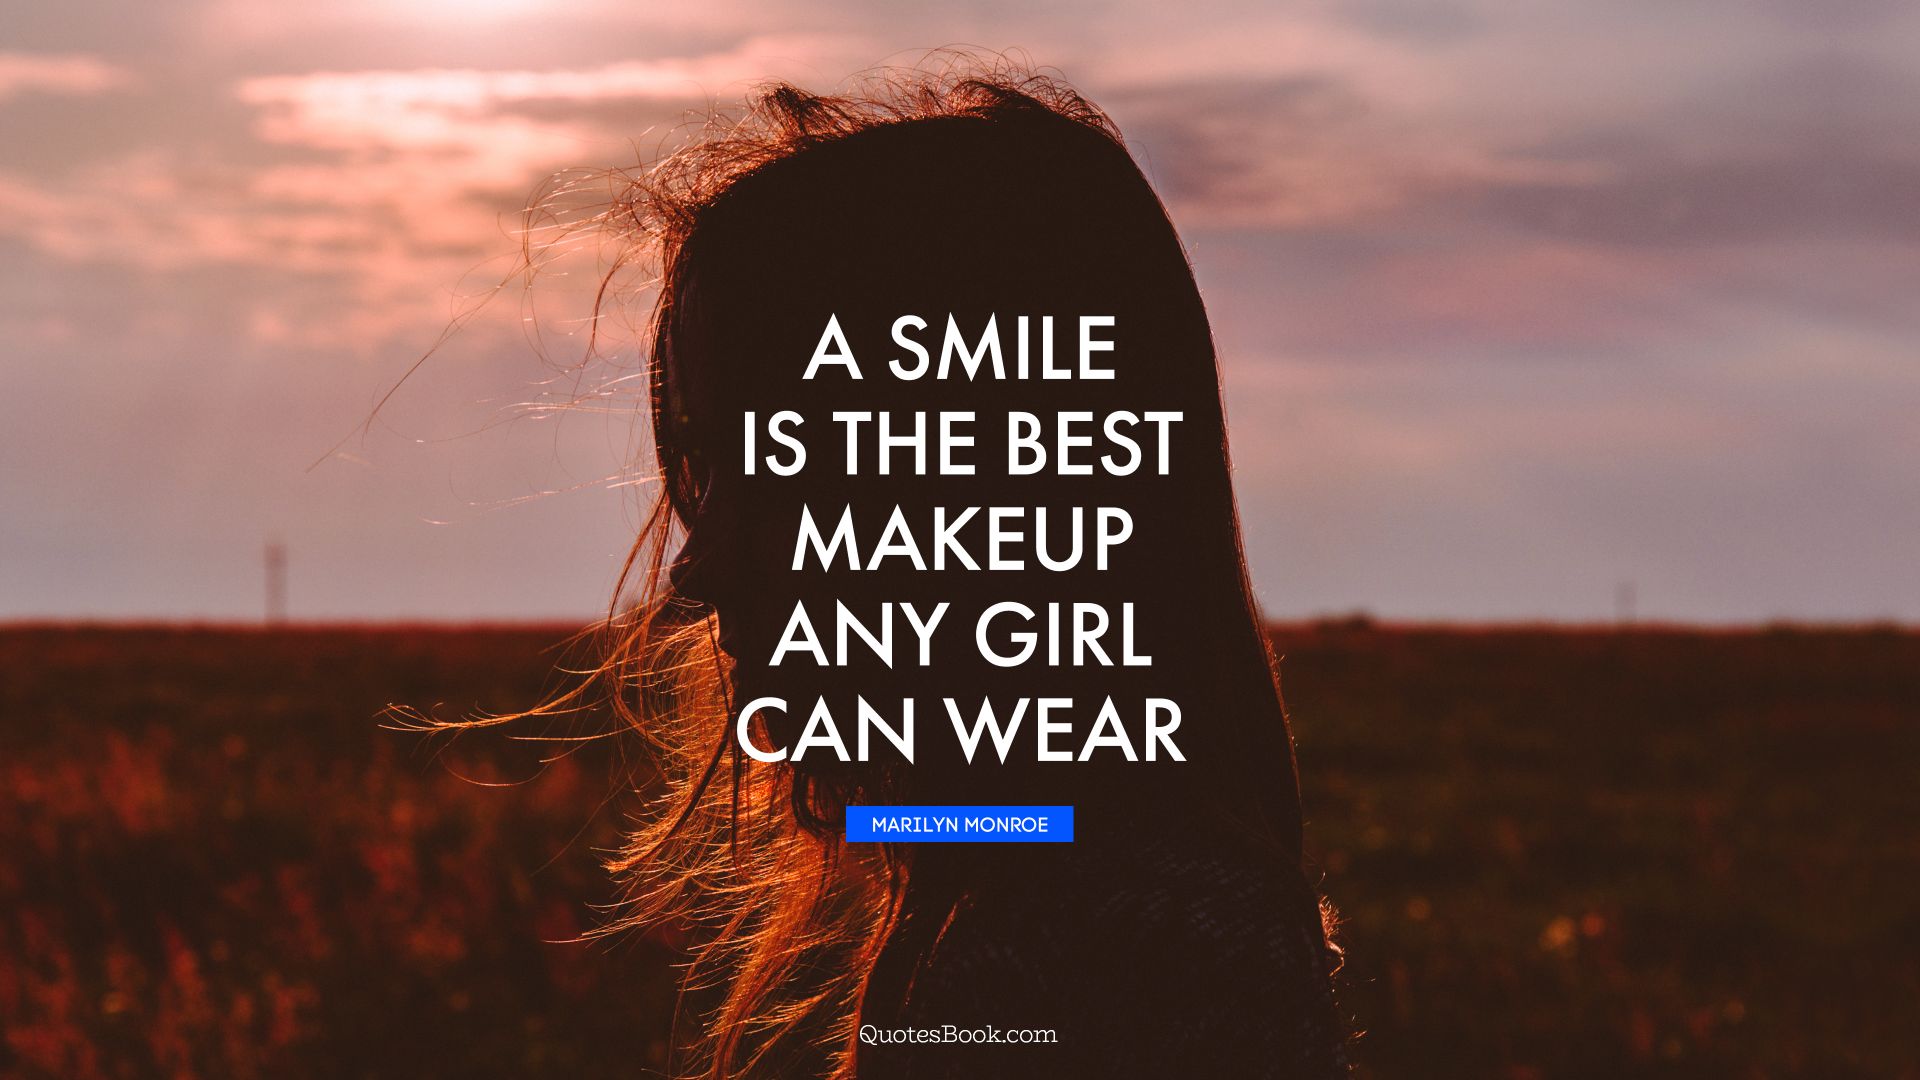 A smile is the best makeup any girl can wear. - Quote by Marilyn Monroe